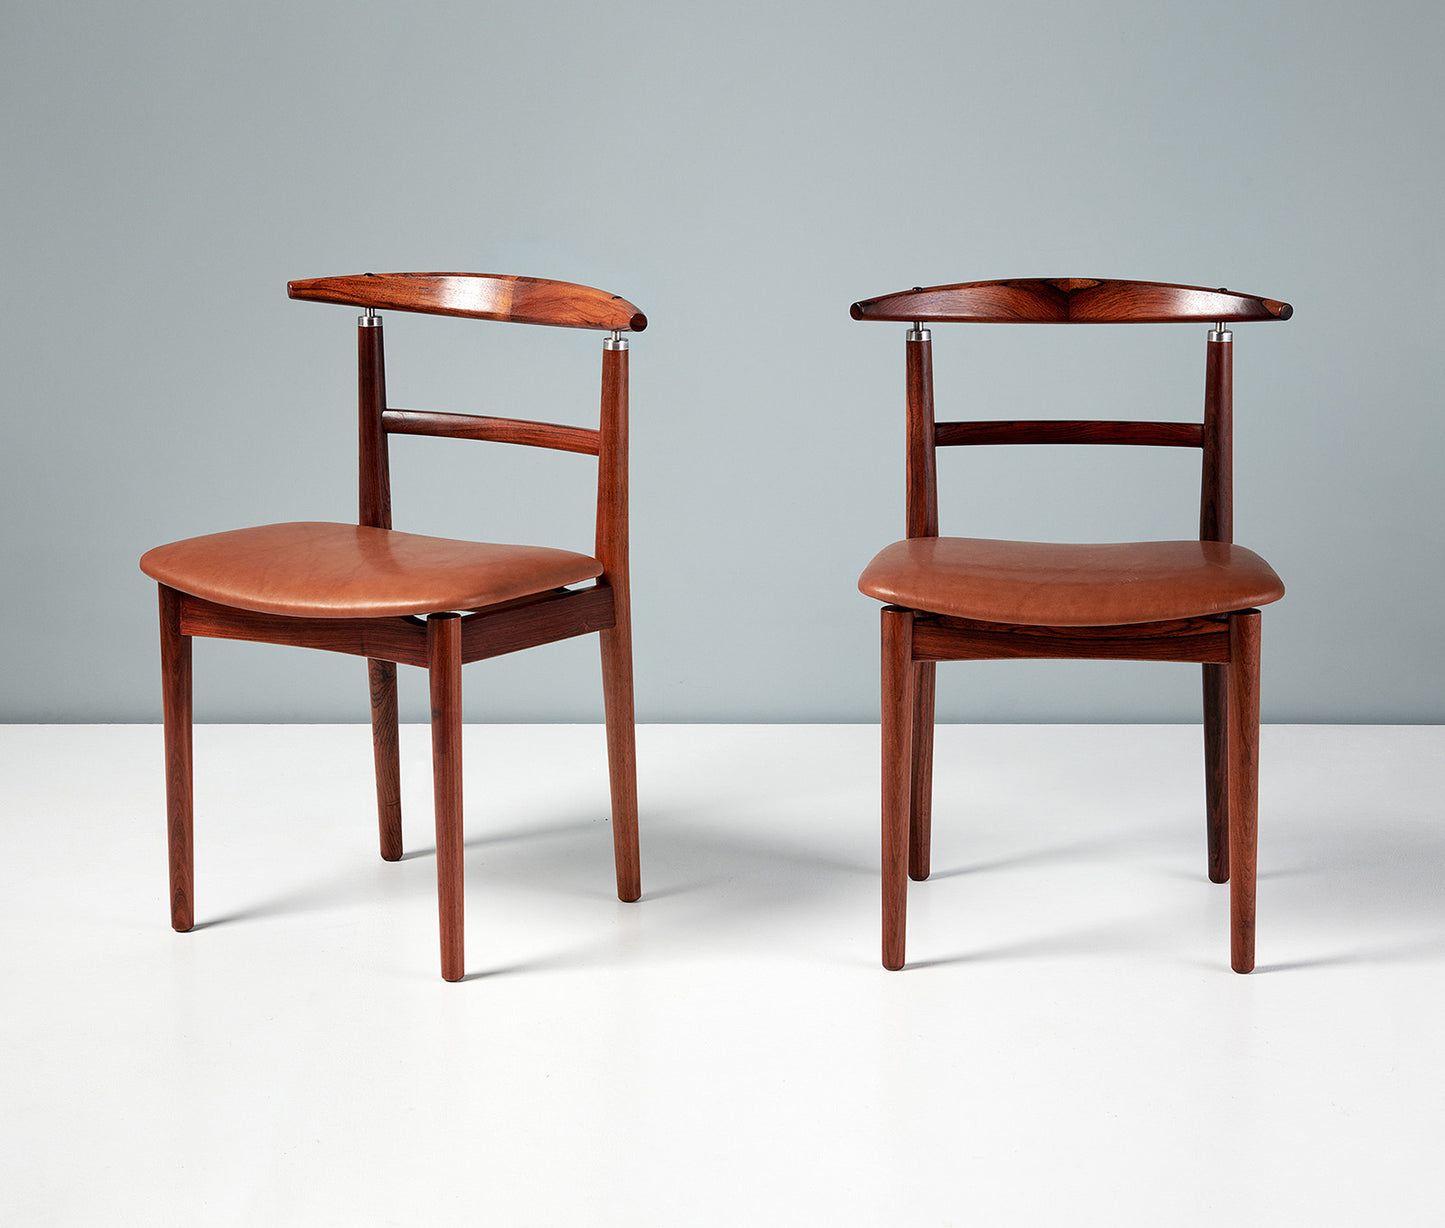 Model 465 Dining Chairs